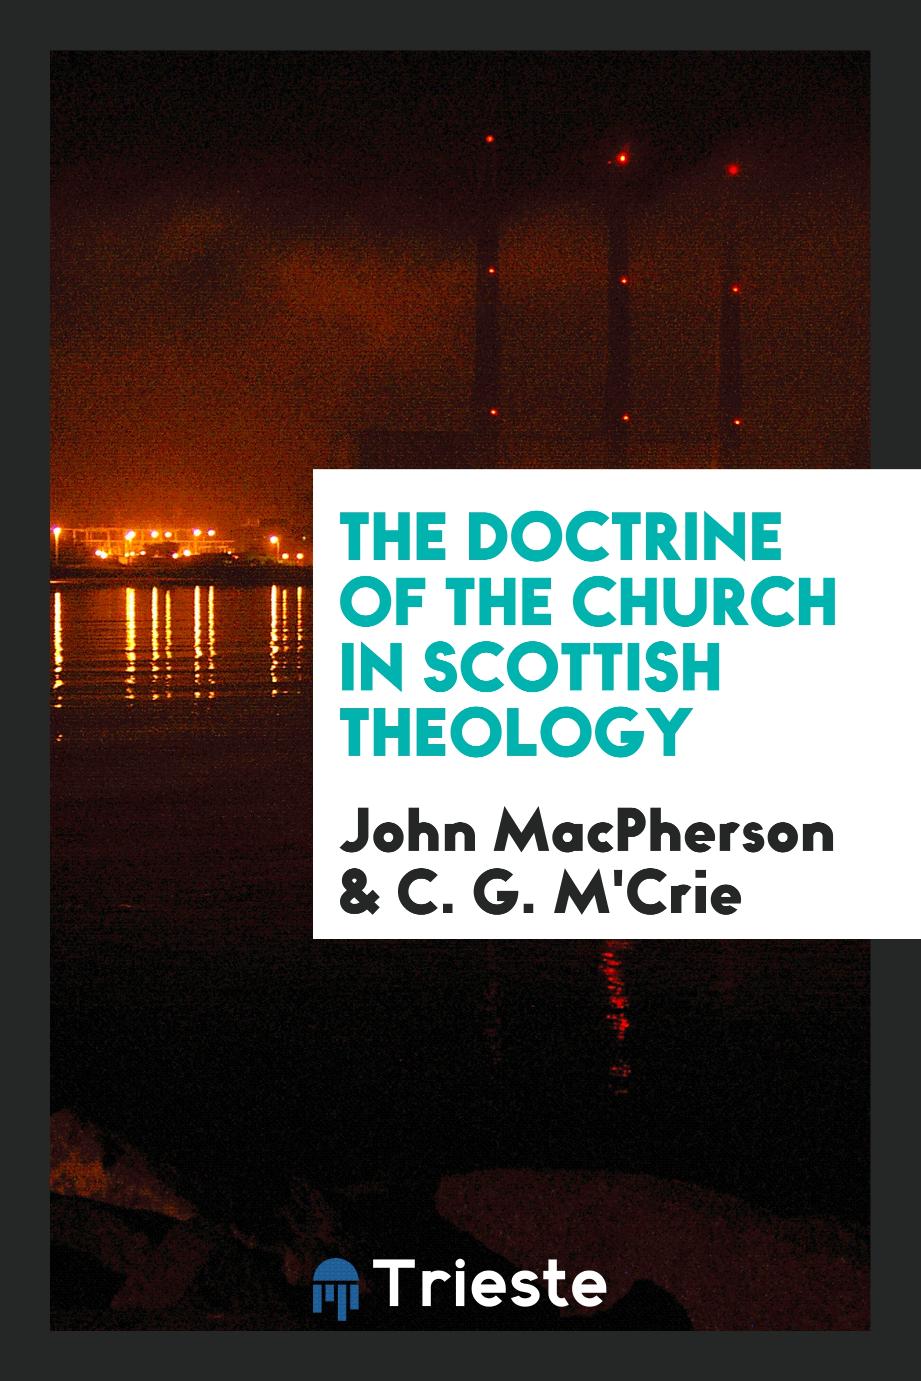 The doctrine of the church in Scottish theology